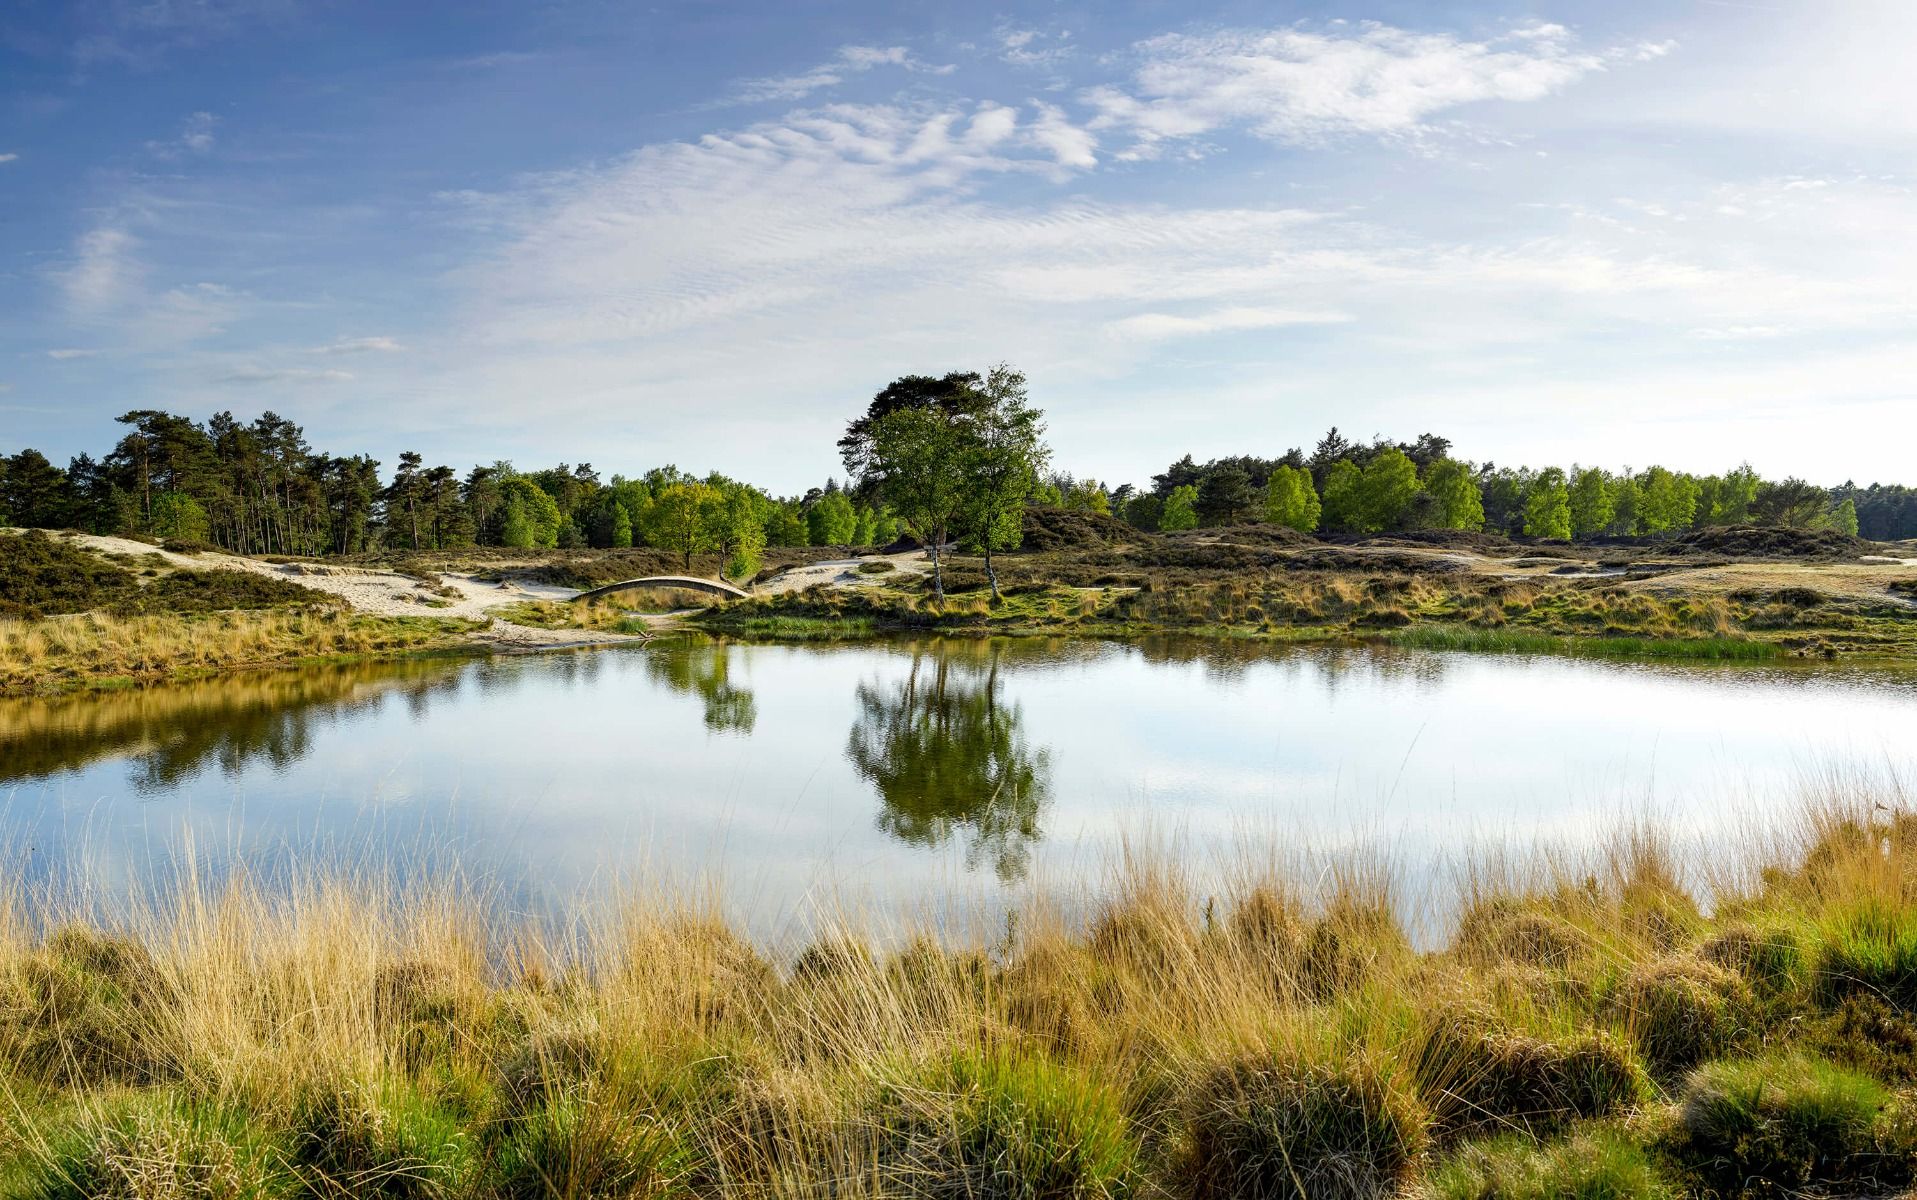 Landscape wallpaper - A small forest lake in the heathland area  - Bedroom